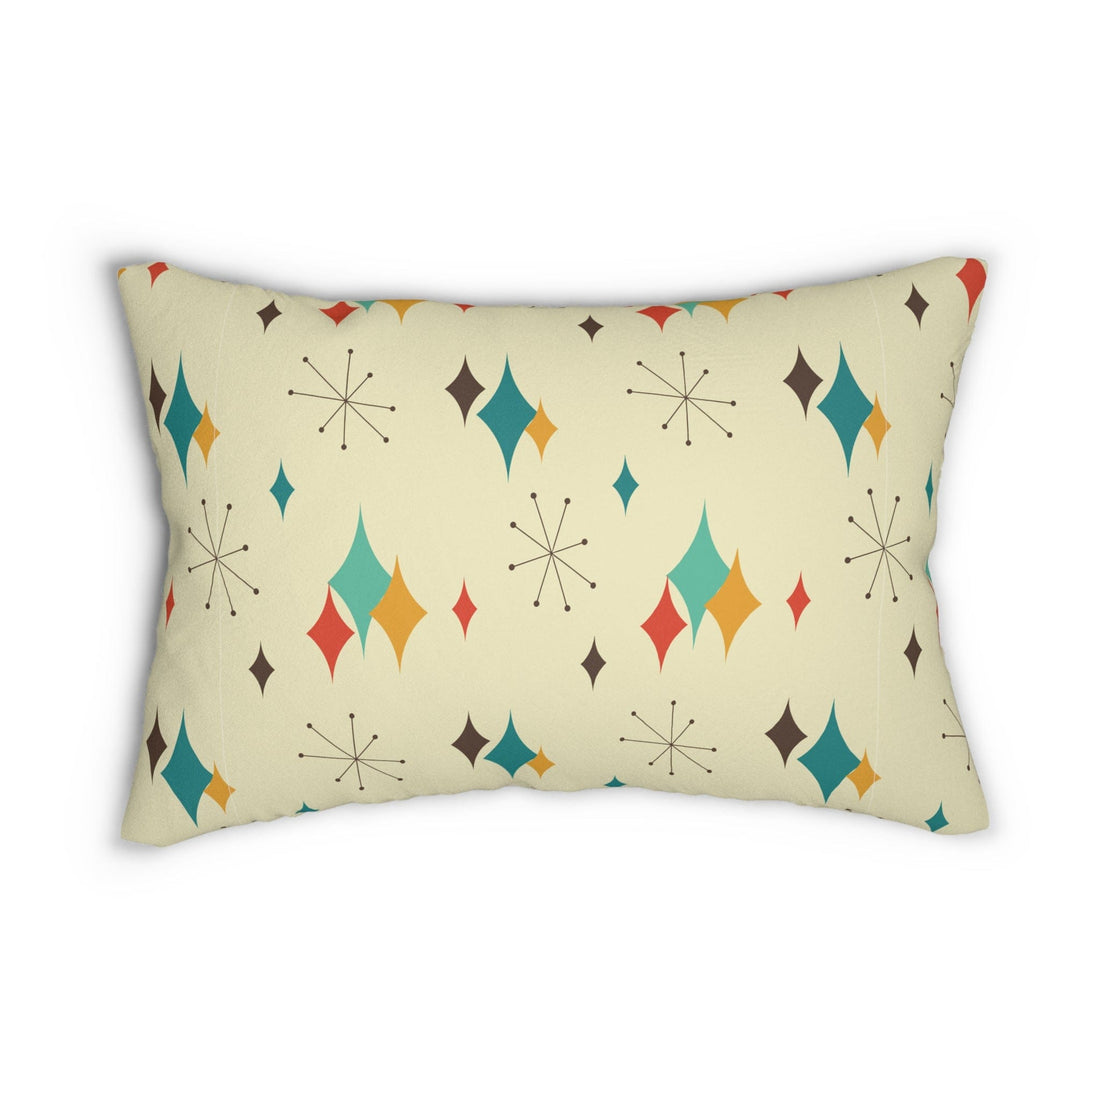 Printify Mid Century Modern Franciscan Starburst Lumbar Pillow, Atomic Age Design, Retro Groovy Throw Cushion, Vintage 50s Vibe, Funky Sofa Accent Home Decor 20&quot; × 14&quot; 72775655124629947286